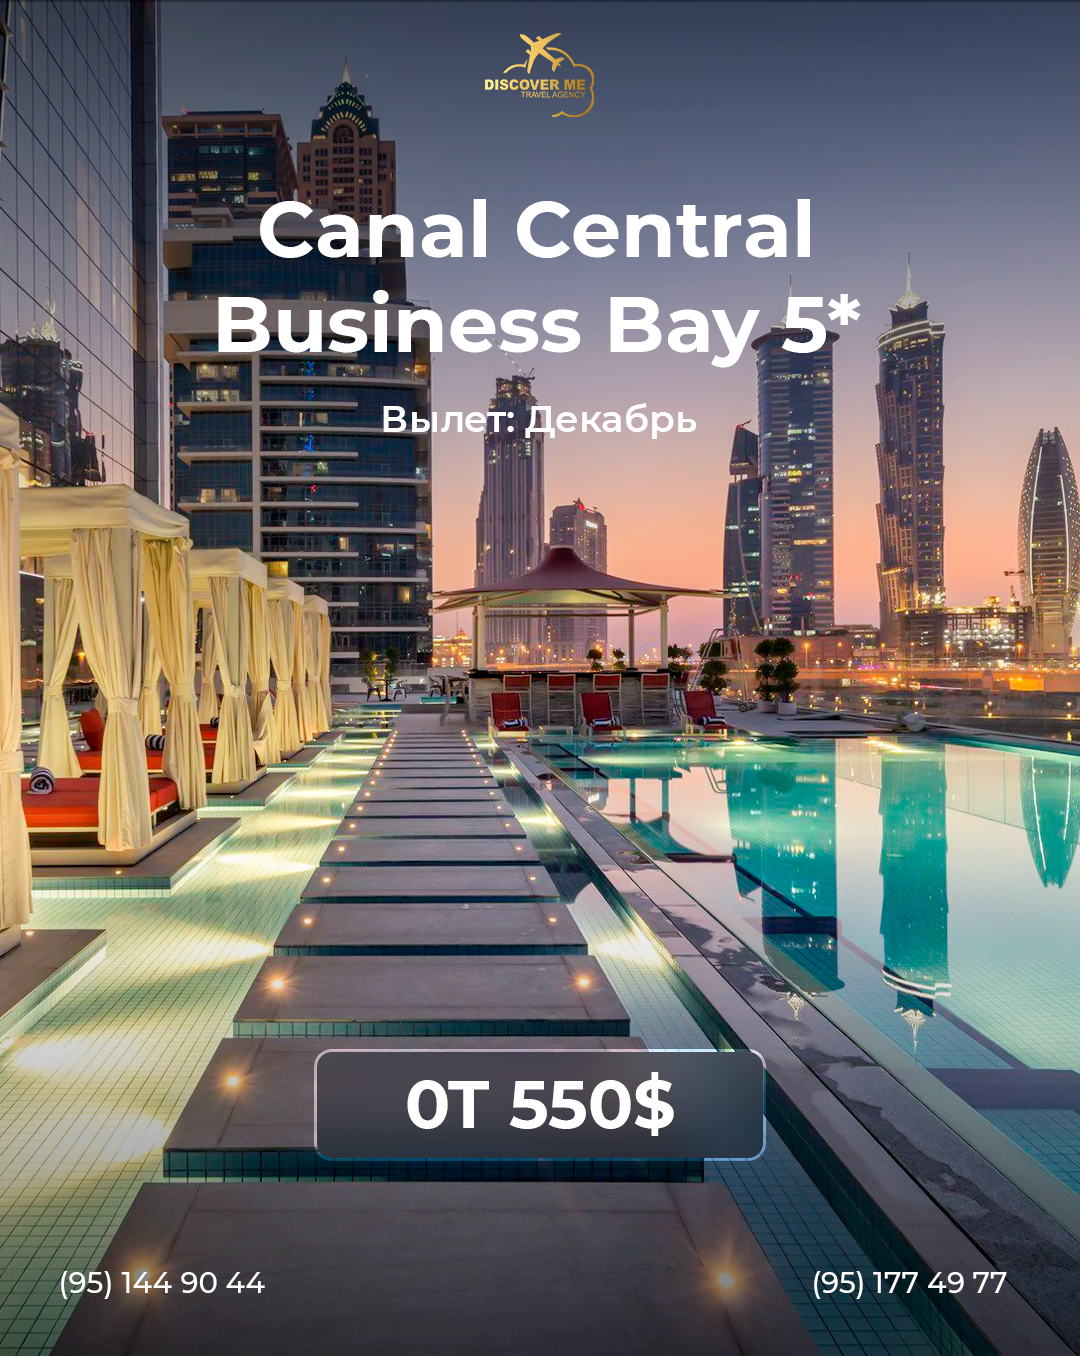 Central canal. Canal Central Business Bay 5 Дубай. Canal Central Hotel. Canal Central Business Bay 5 бизнес Бэй. Canal Central Business Bay 5 вид сверху.